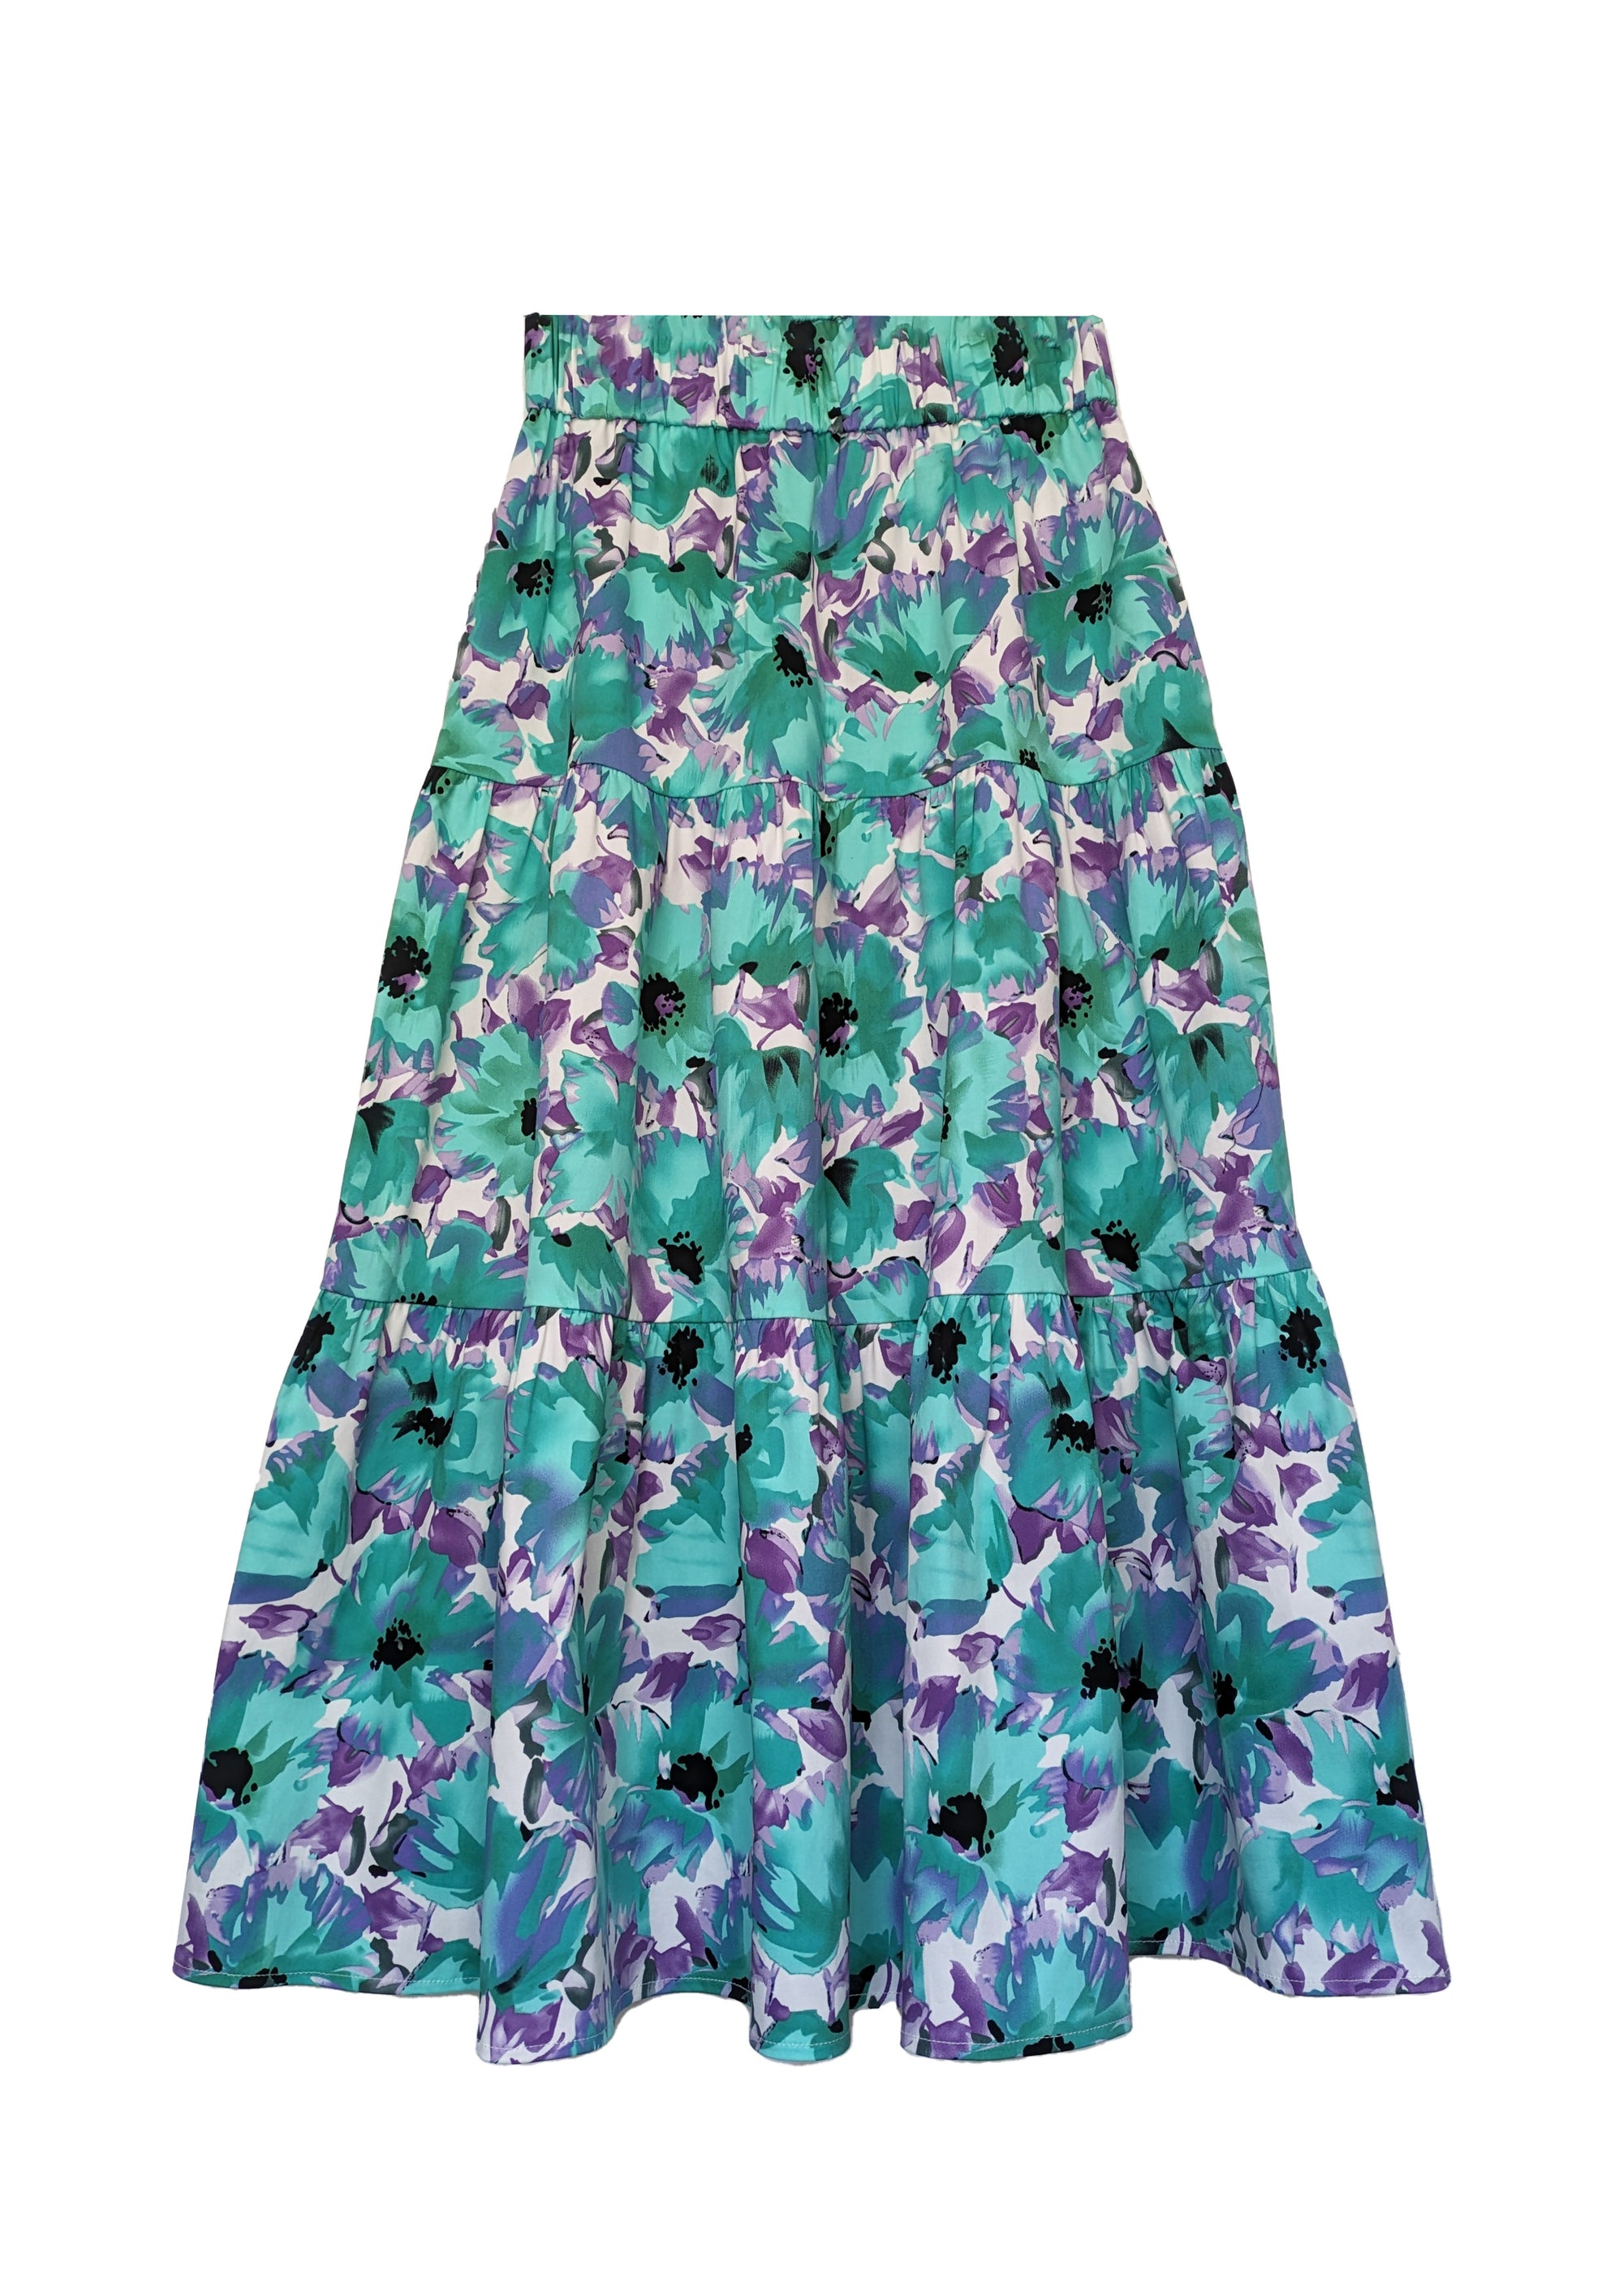 Blue floral print tiered skirt